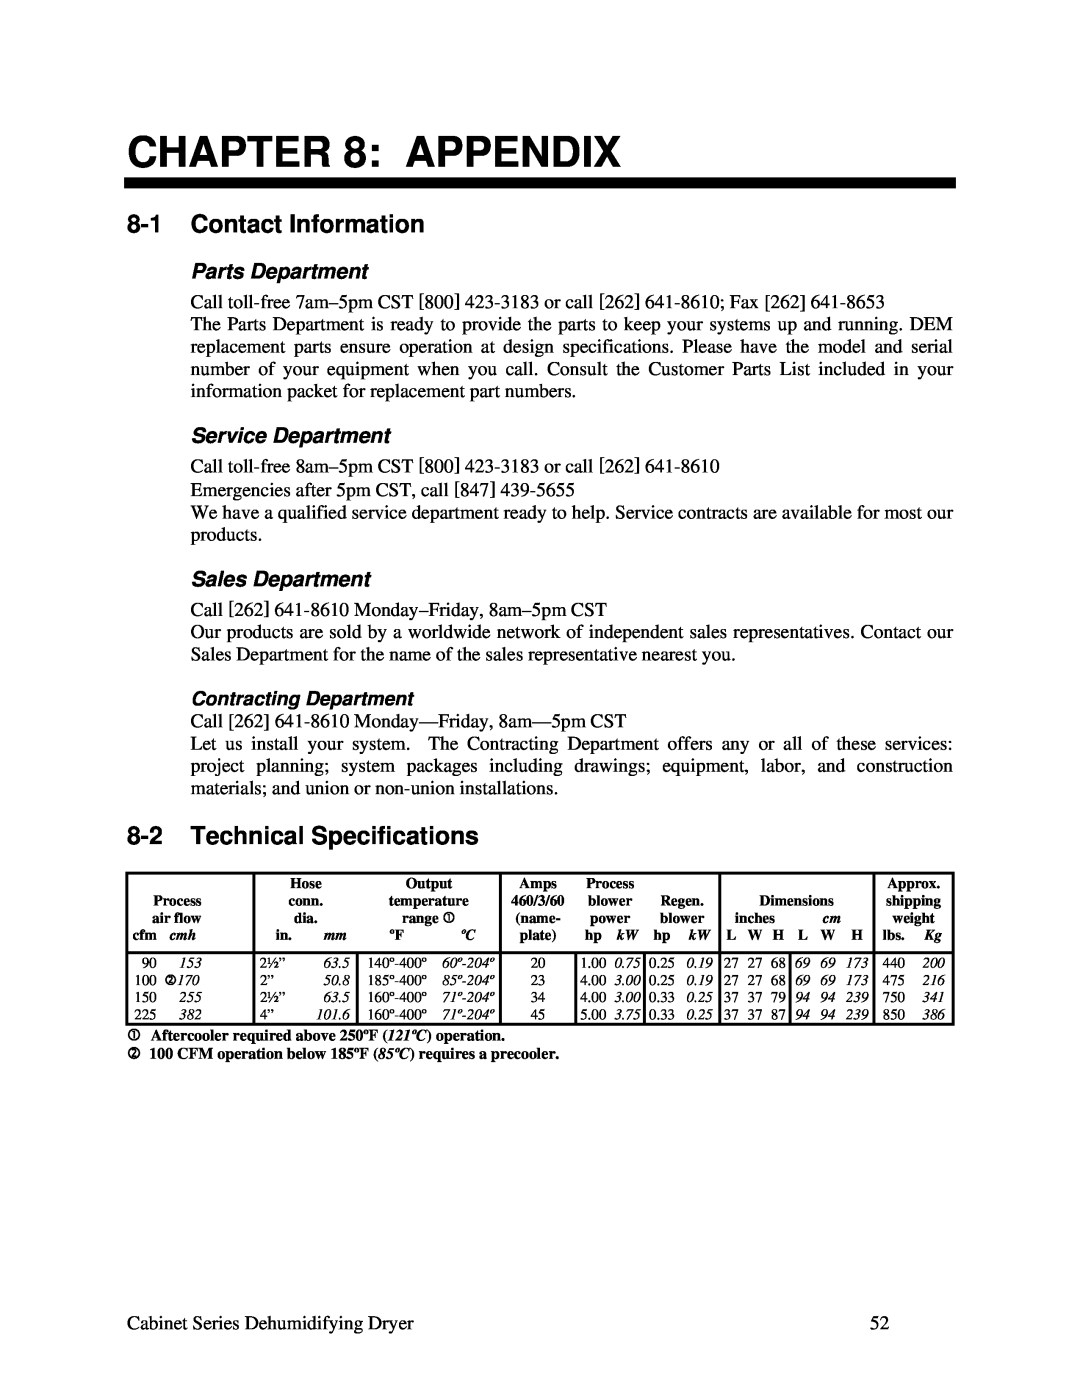 Sterling Plumbing 150 Appendix, 8-1Contact Information, 8-2Technical Specifications, Parts Department, Service Department 